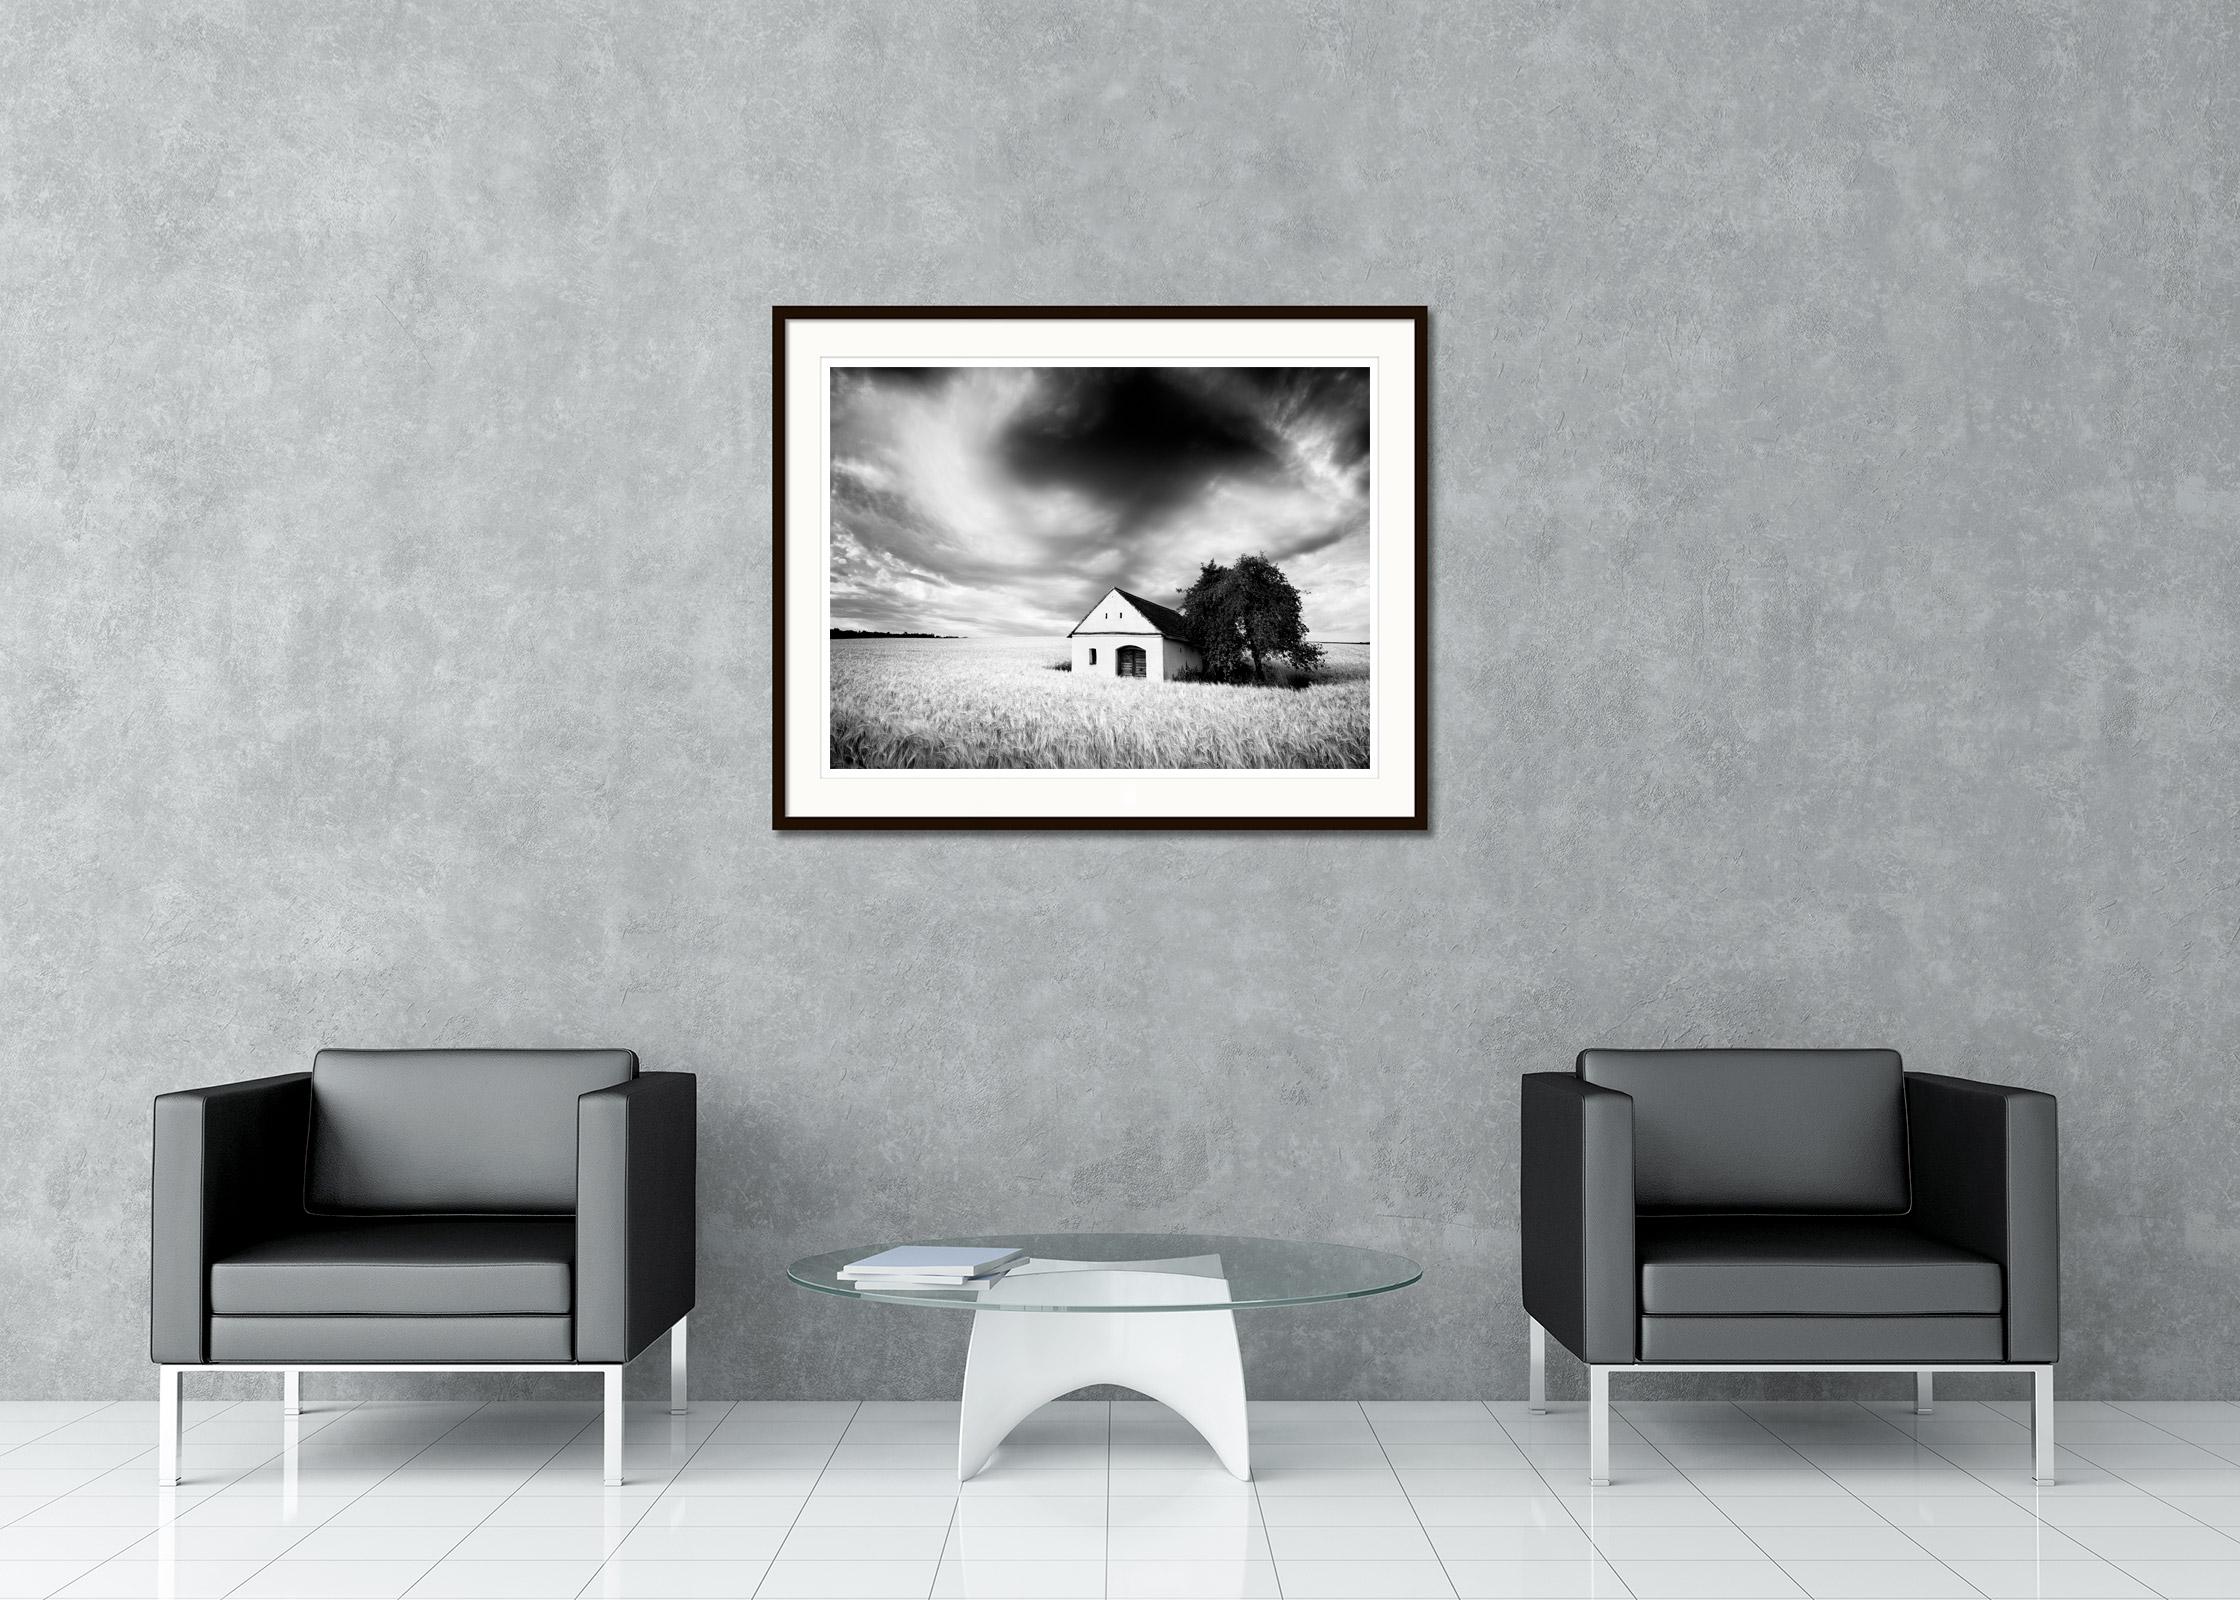 Black and White Fine Art Landscape Photography. Wine press house in wheat field, heavy clouds, storm, Austria. Archival pigment ink print, edition of 8. Signed, titled, dated and numbered by artist. Certificate of authenticity included. Printed with